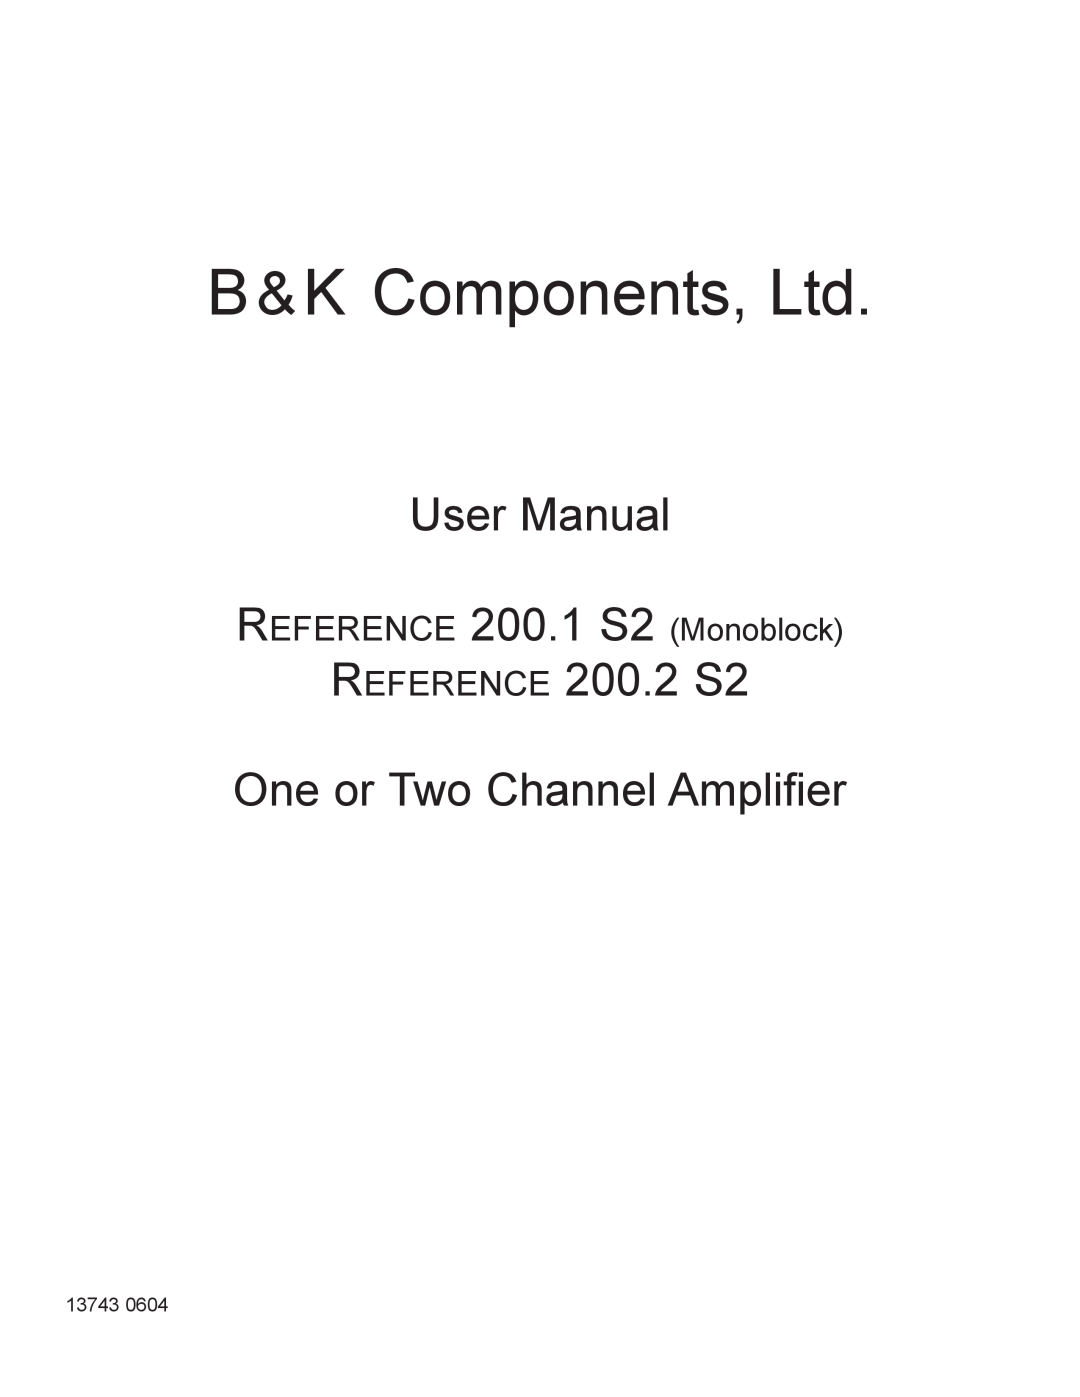 B&K user manual REFERENCE 200.2 S2 One or Two Channel Amplifier, REFERENCE 200.1 S2 Monoblock 